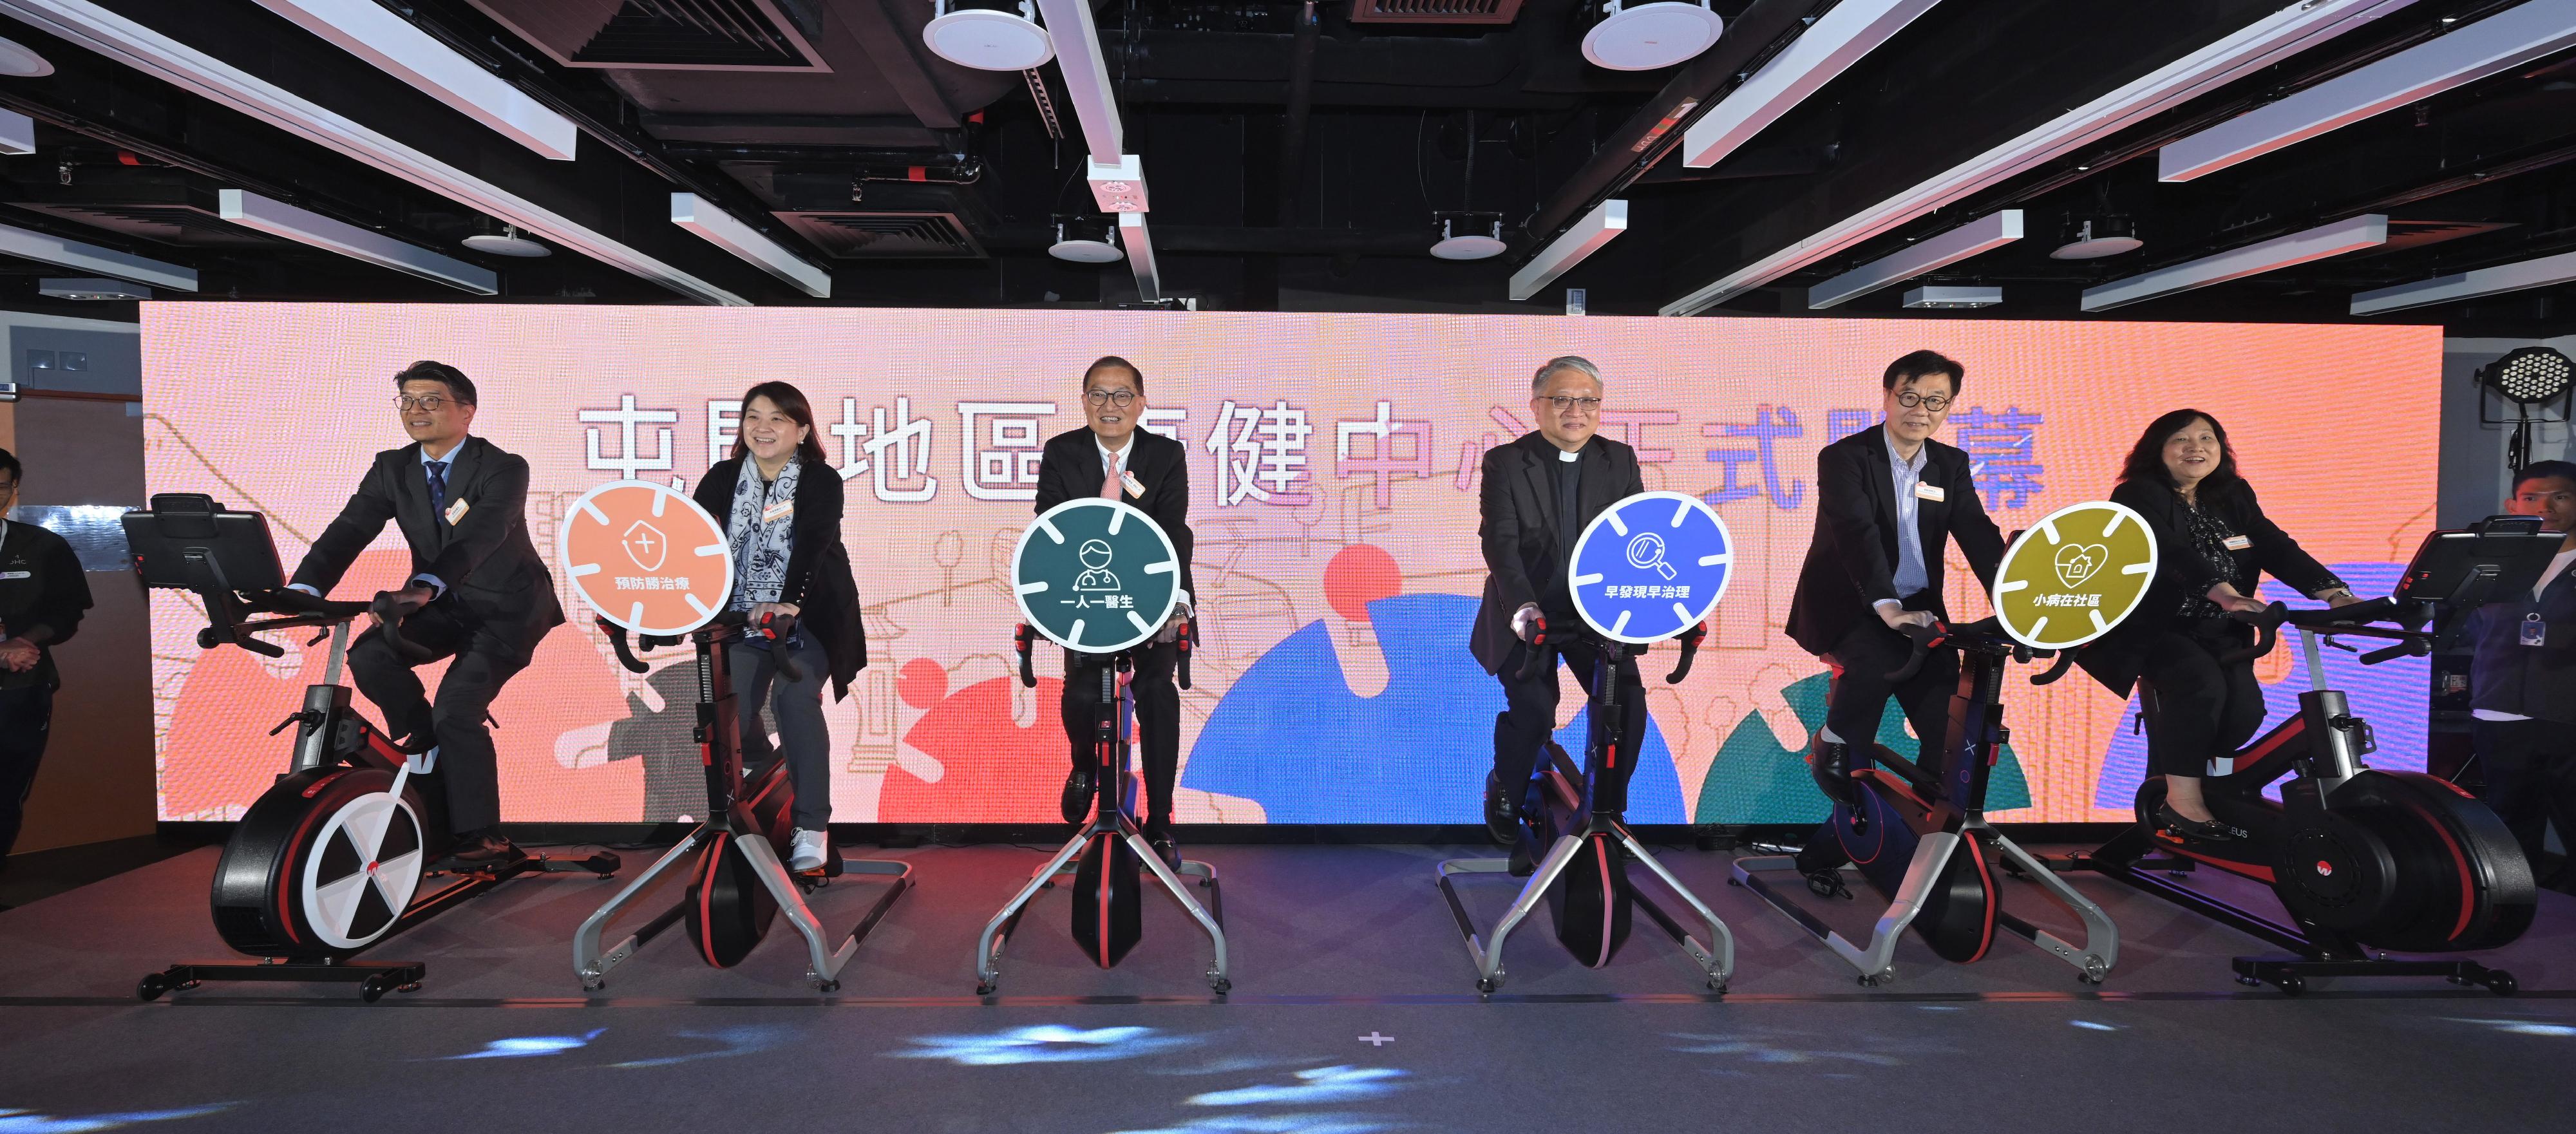 The Secretary for Health, Professor Lo Chung-mau, attended the opening ceremony of the Tuen Mun District Health Centre today (March 13). Photo shows (from first left) the Commissioner for Primary Healthcare, Dr Pang Fei-chau; the Under Secretary for Health, Dr Libby Lee; Professor Lo; the Bishop of the Evangelical Lutheran Church of Hong Kong (ELCHK), the Reverend Chang Chun-wa; the Chairman of the Executive Committee of the ELC Social Service - Hong Kong, Mr Kwok Kang-ming; and the Chief Executive of the ELC Social Service - Hong Kong, Ms Chan Lai-kwan, officiating at the ceremony.